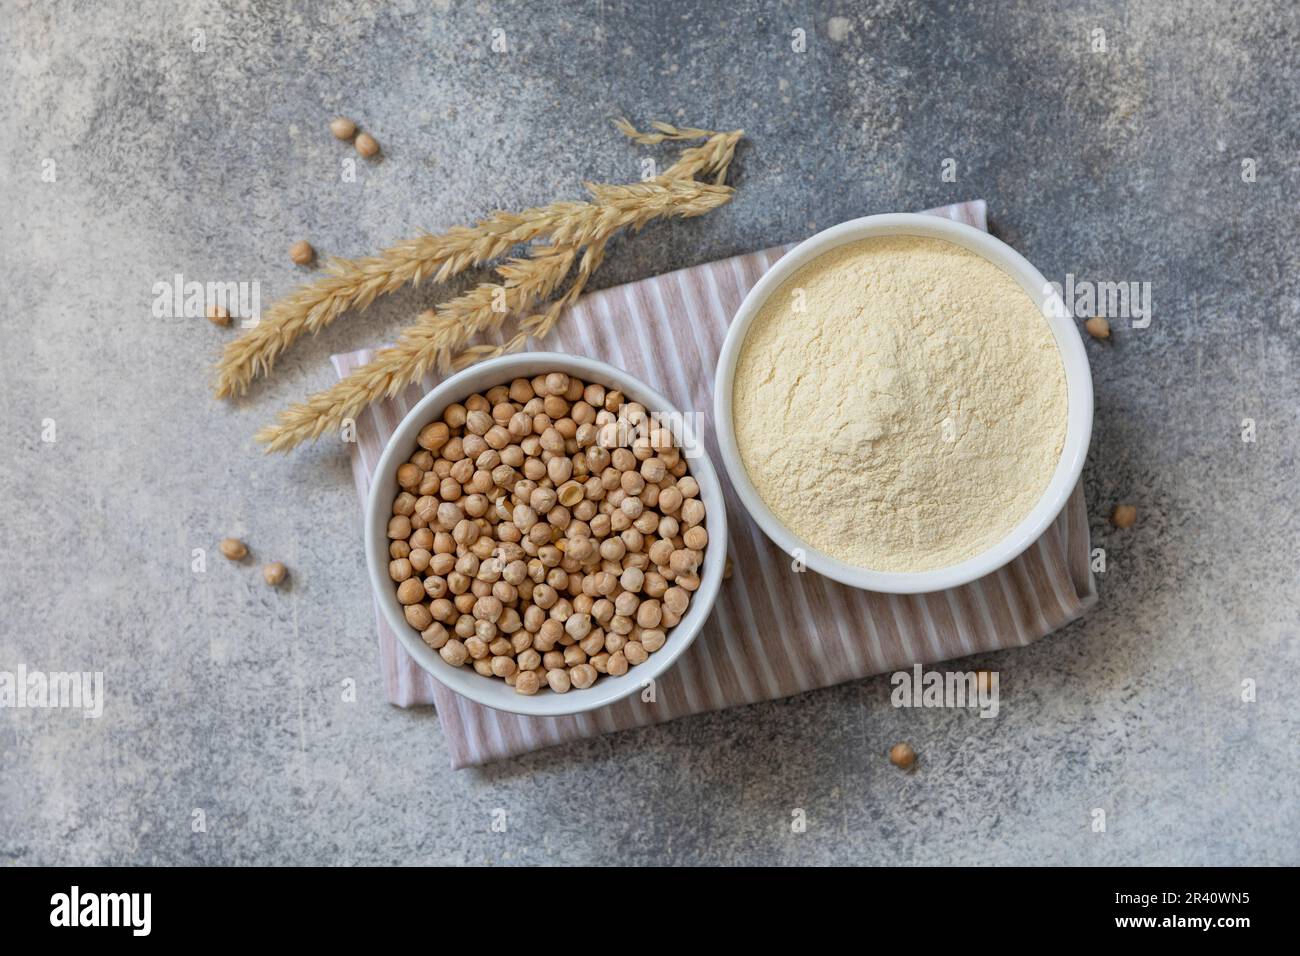 Food and baking gluten-free protein ingredient. Chickpea flour wholesome and raw chickpea over gray stone table. Top view flat l Stock Photo